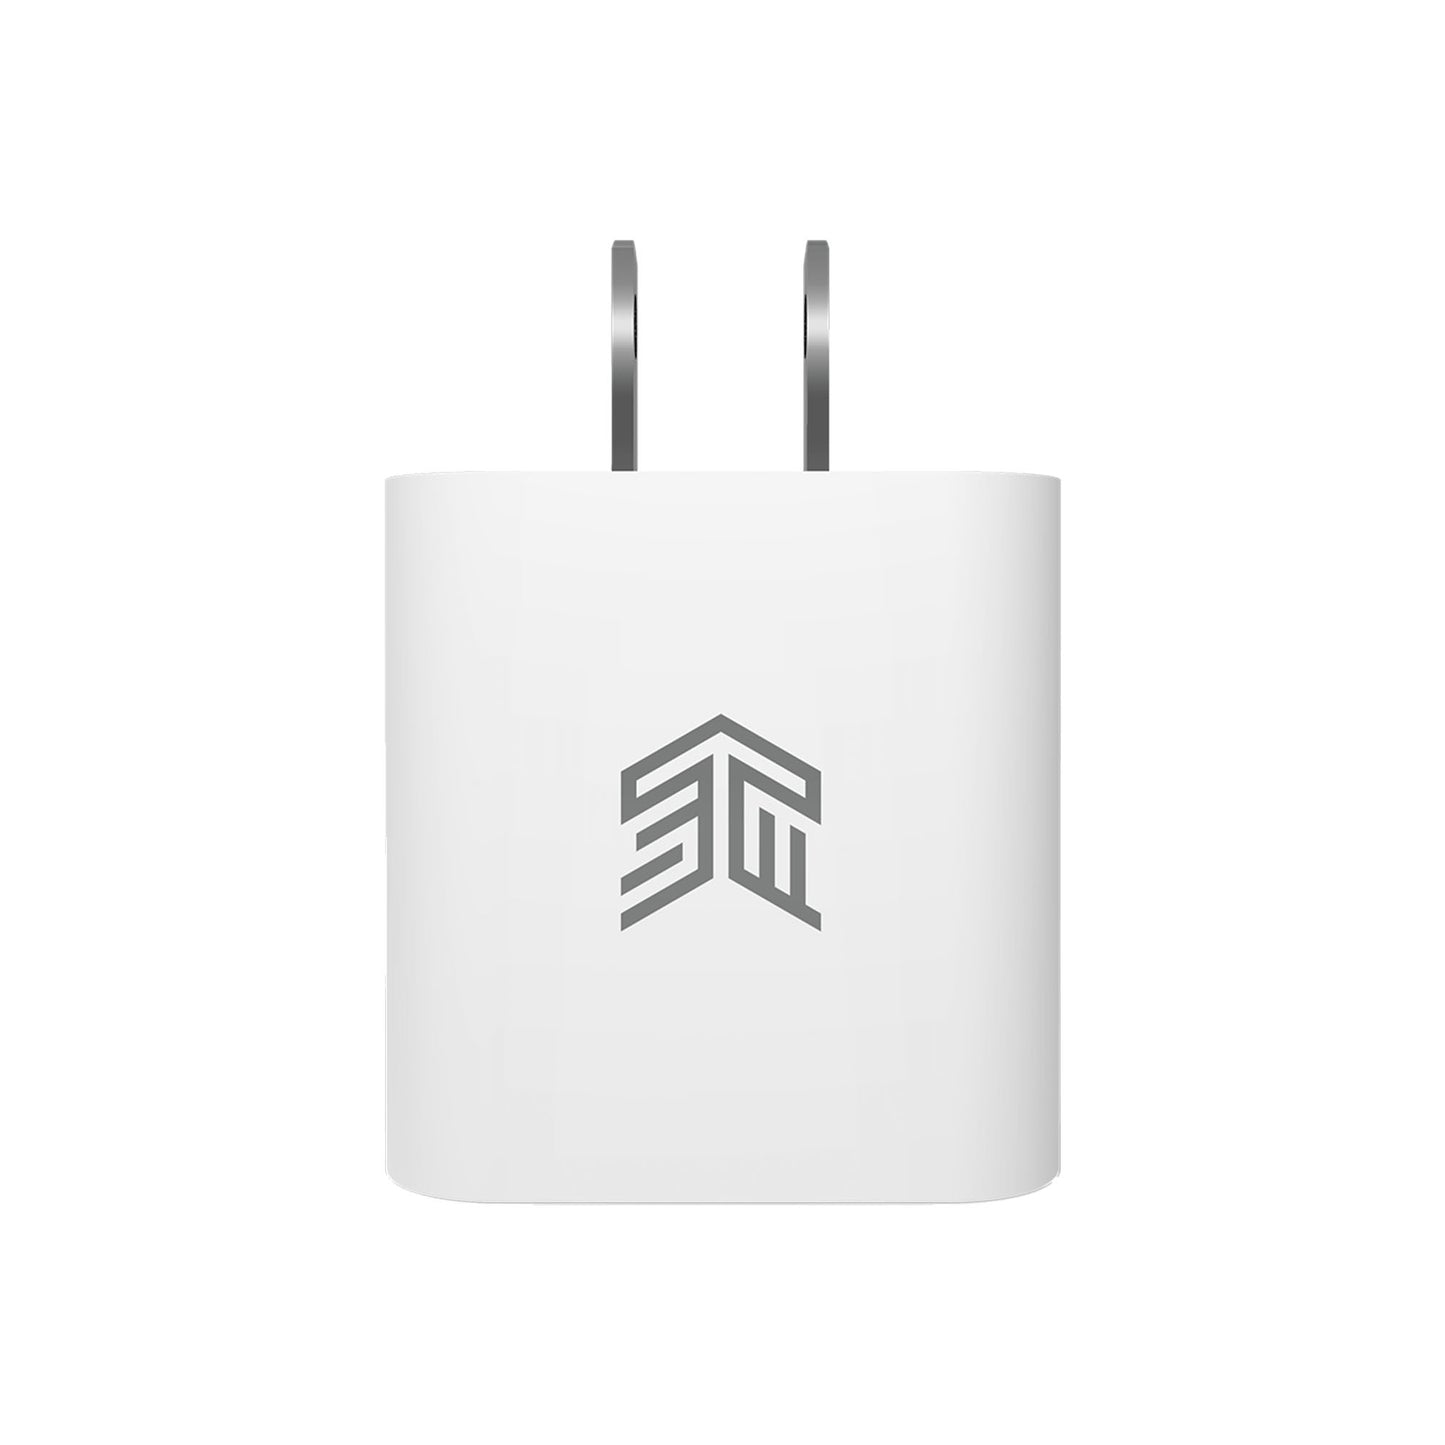 STM PowerAdapter 20W USB-C Wall Charger - White